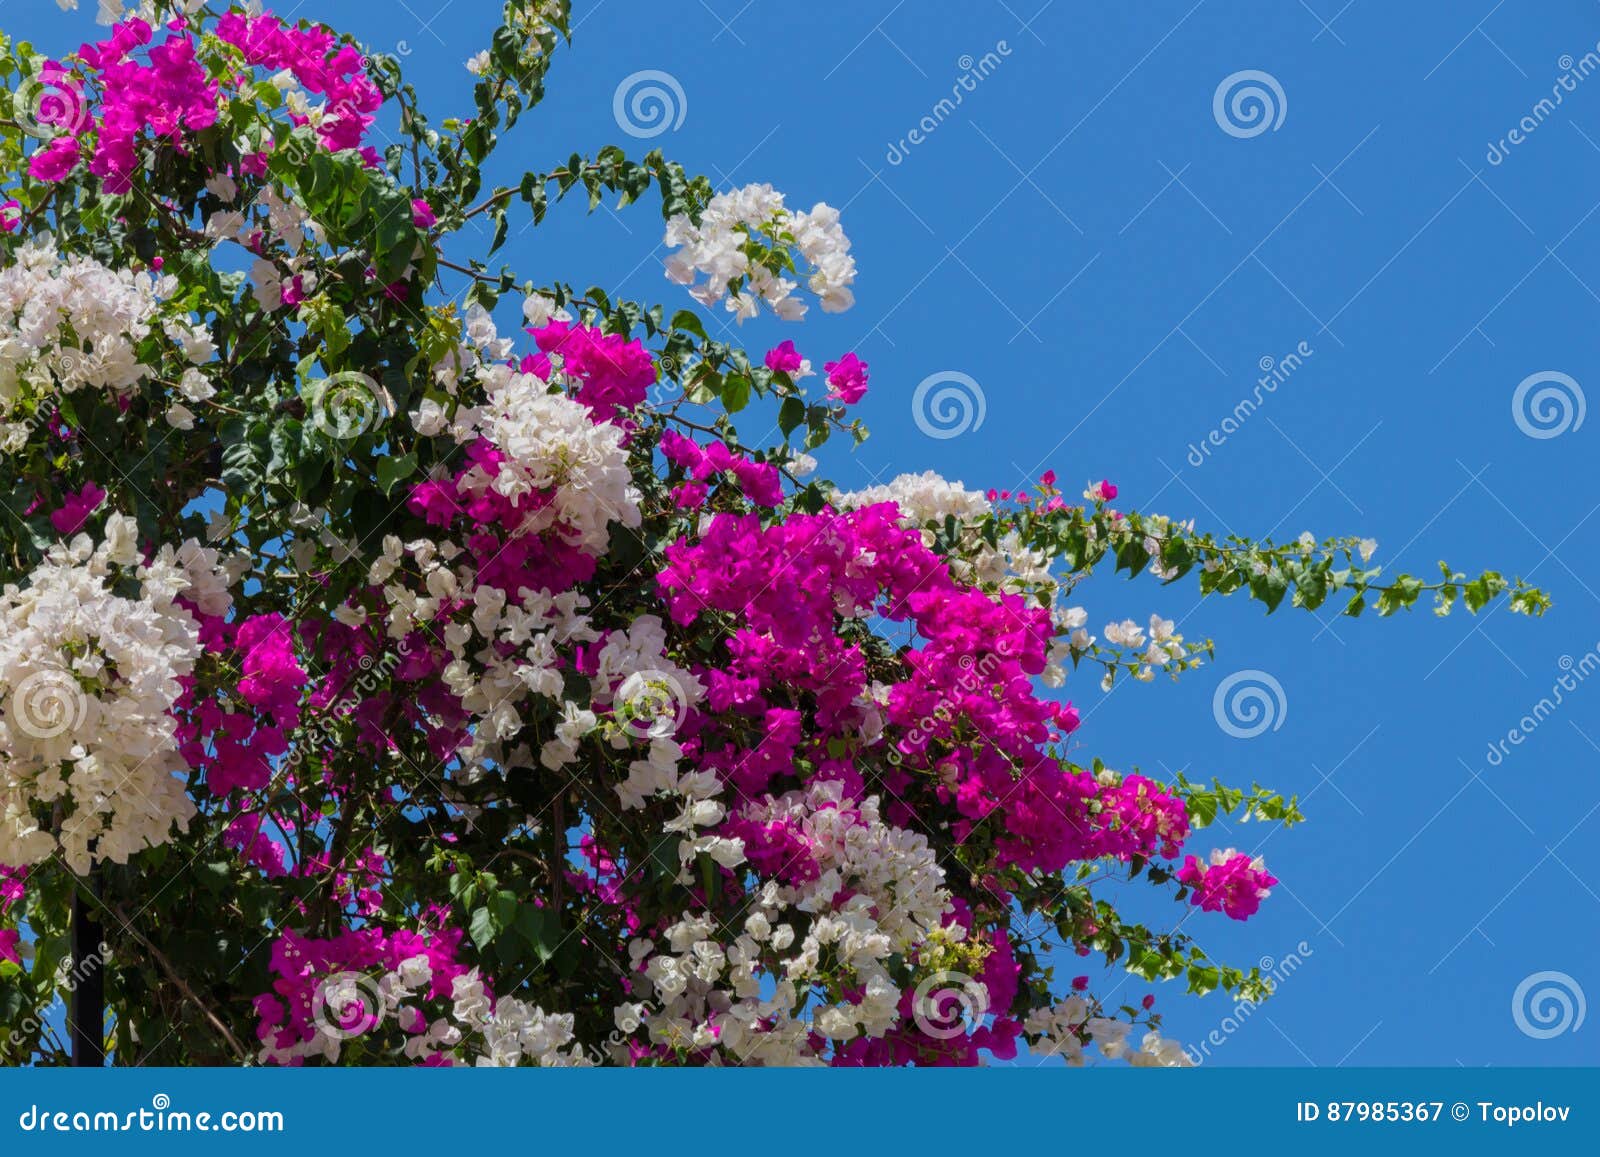 Bougainvillea flowers. stock image. Image of leaves, pink - 87985367